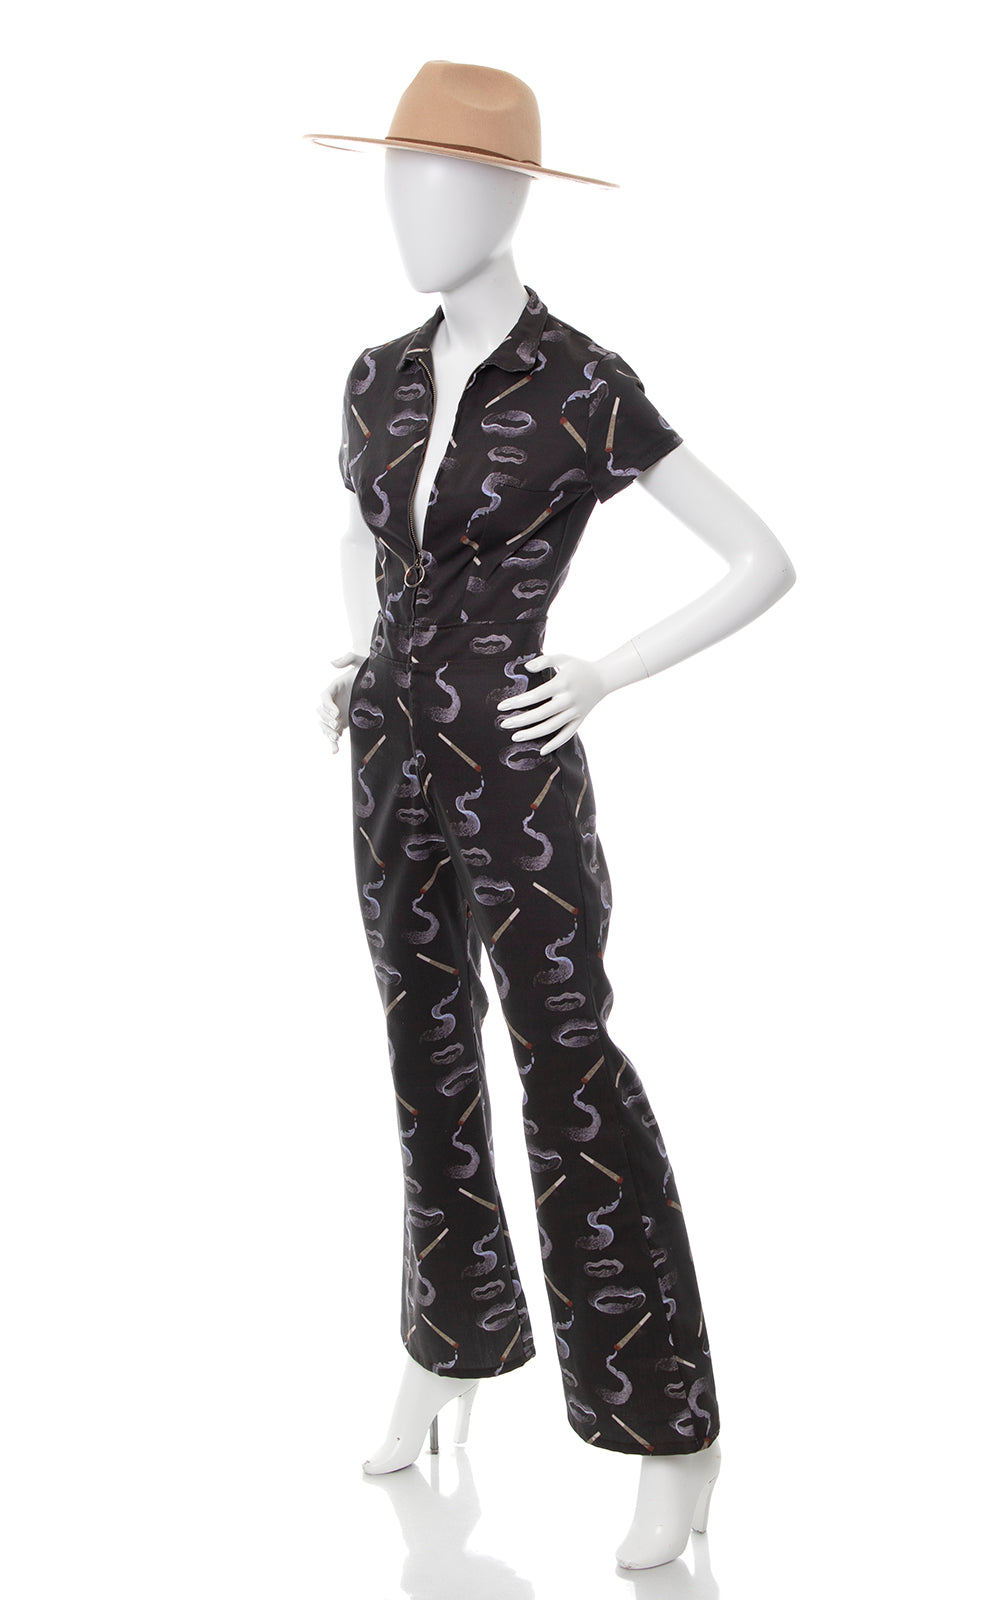 Modern 1970s Style THE CREATURES Smoking Novelty Jumpsuit | small